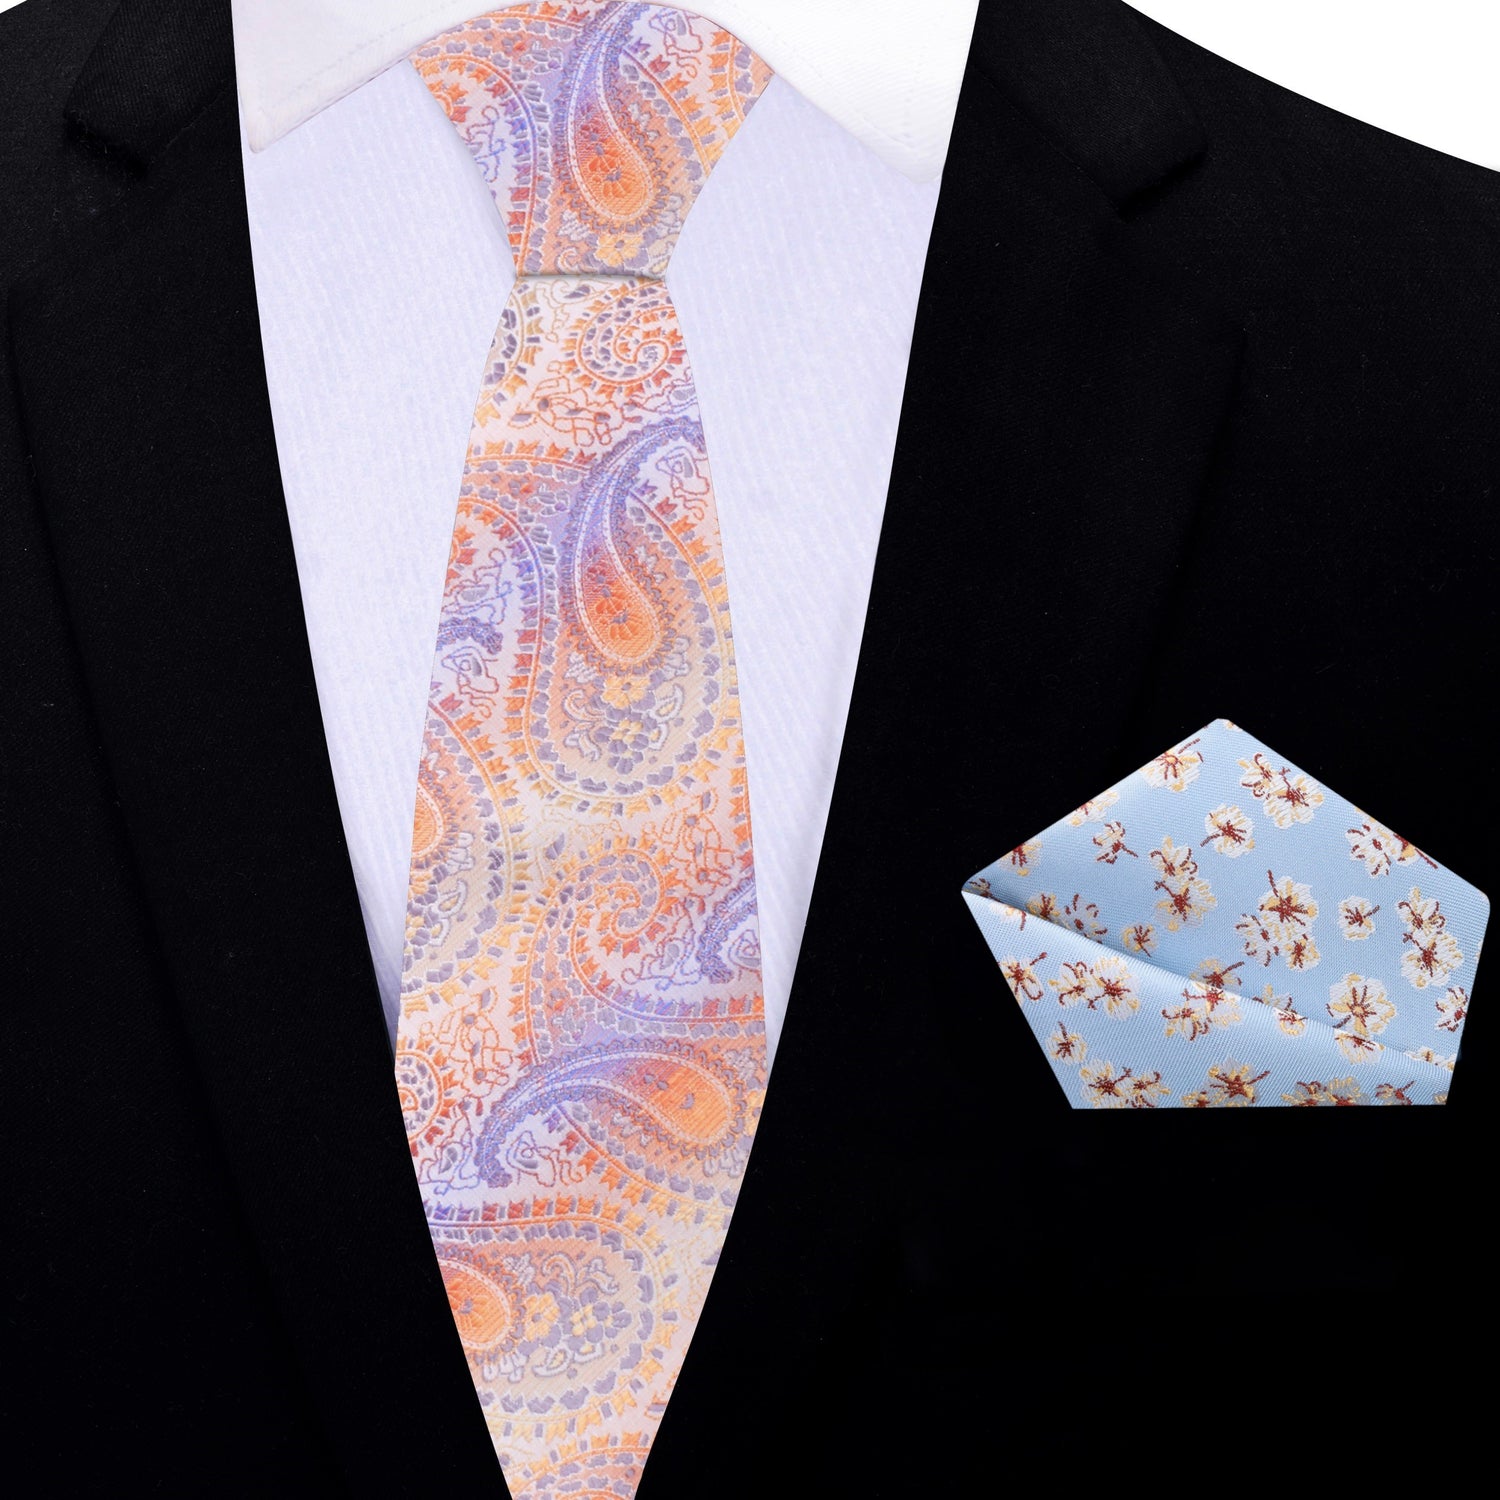 Thin Tie: Shades of Pastel Orange and Purple Paisley with Light Blue Floral Square